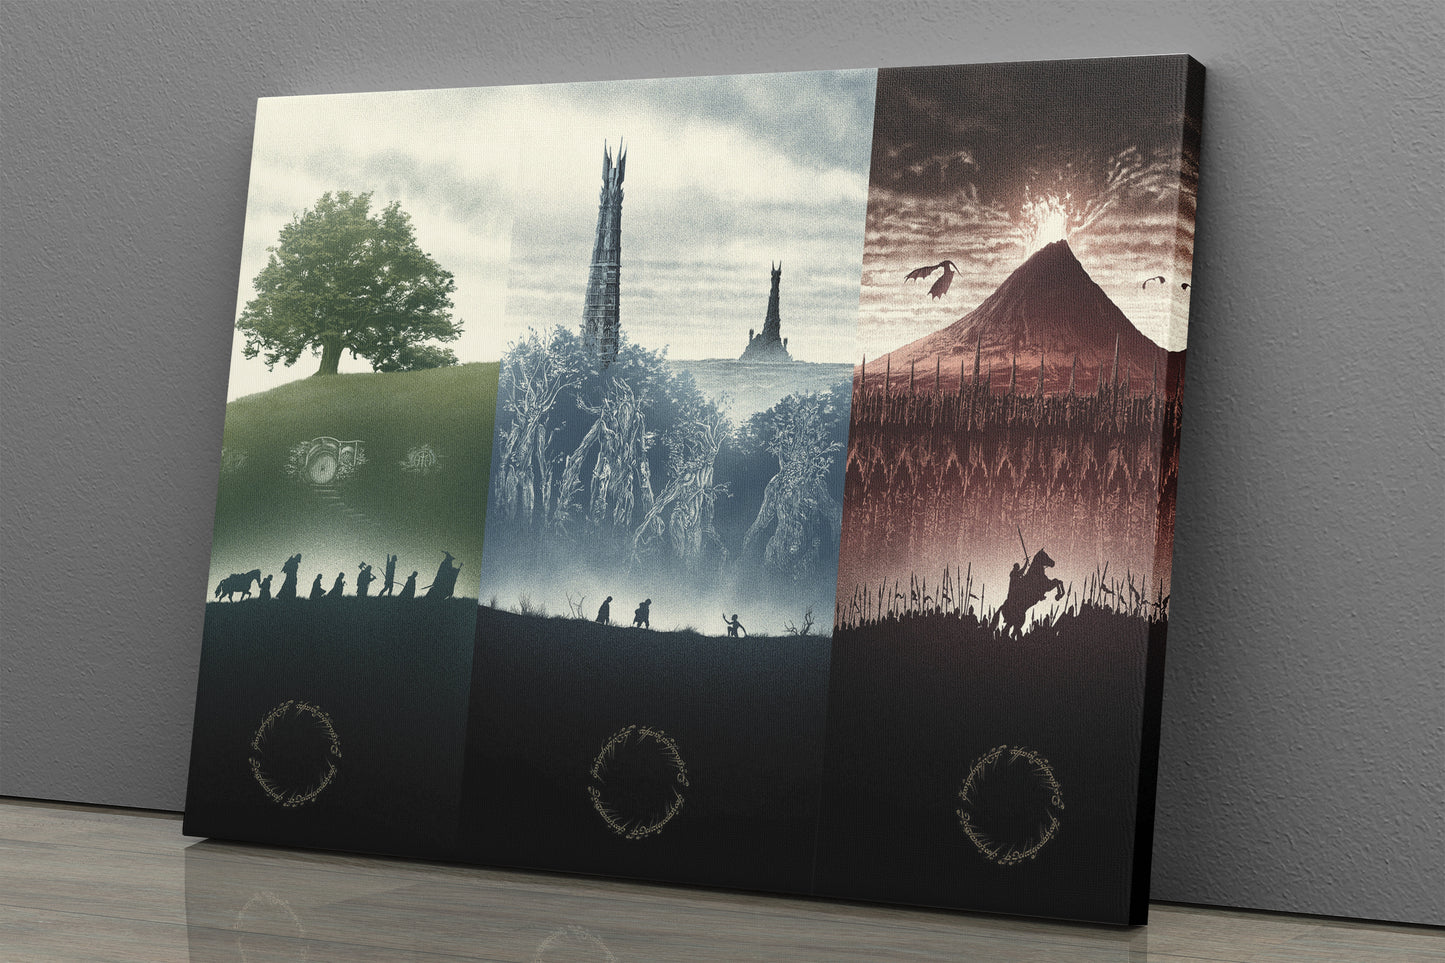 Lord of The Rings Poster Trilogy Wall Art Home Decor Hand Made Canvas Print